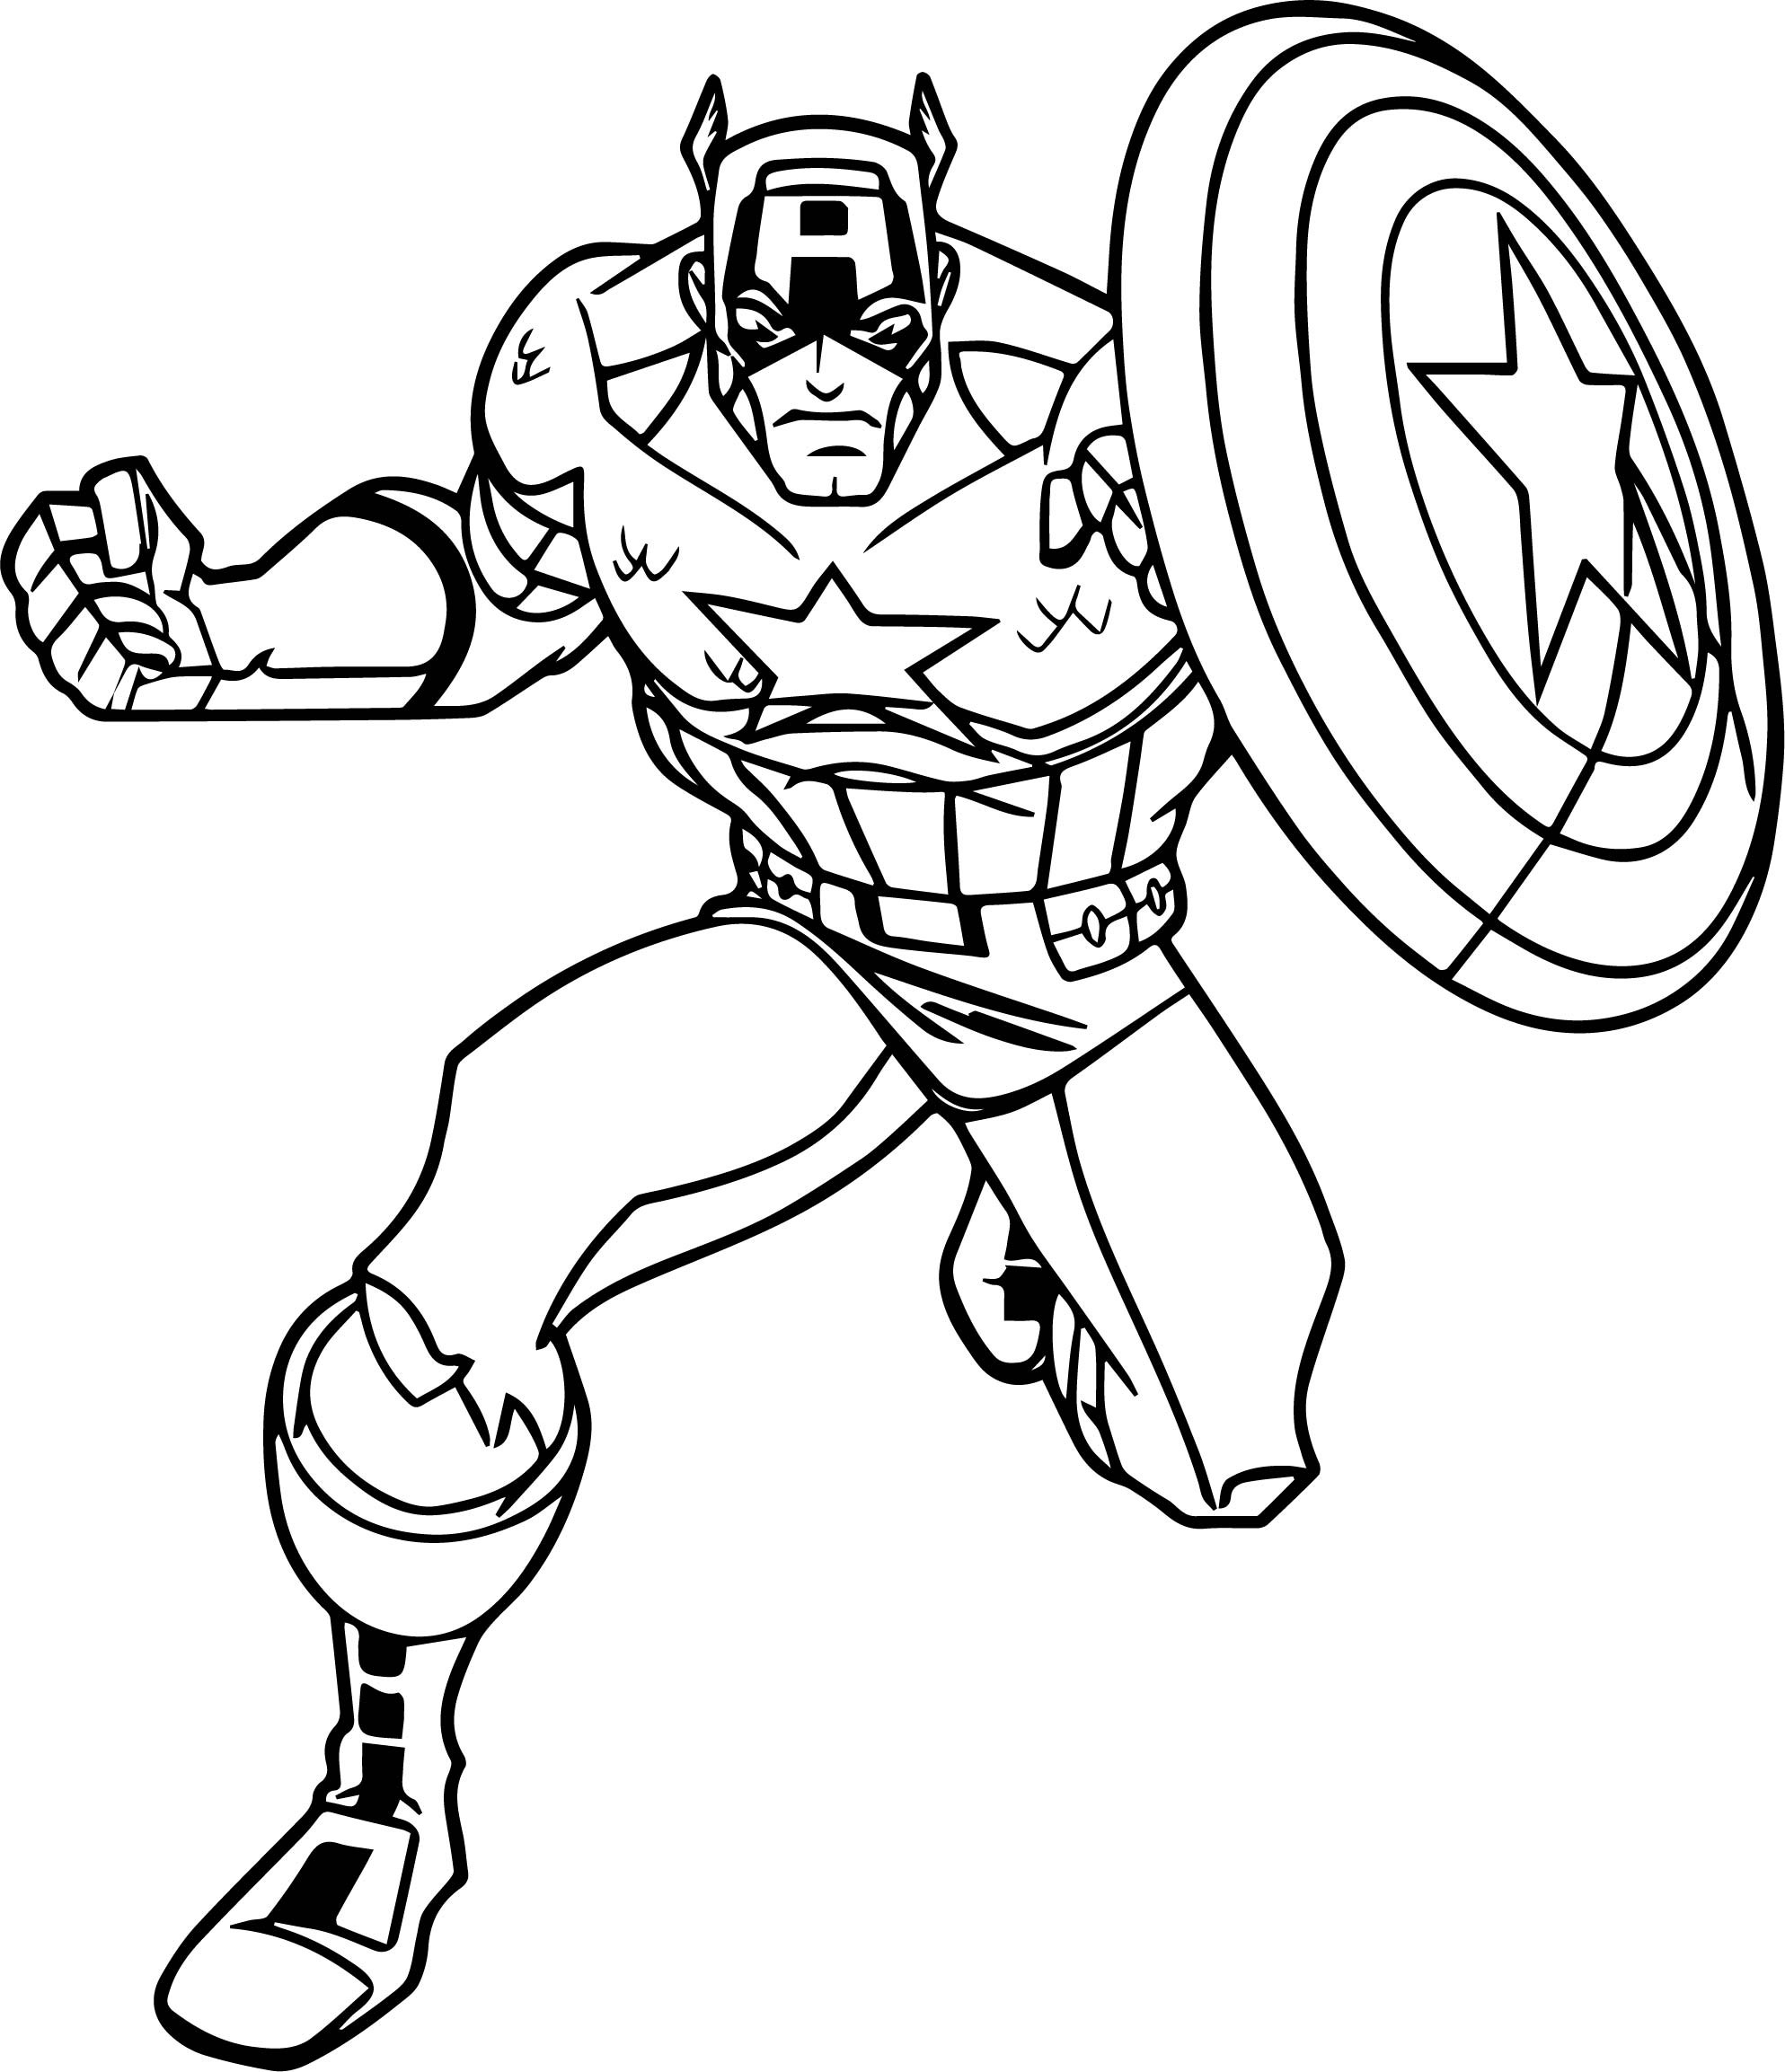 Captain America Coloring Sheet
 Avengers Captain America Coloring Page